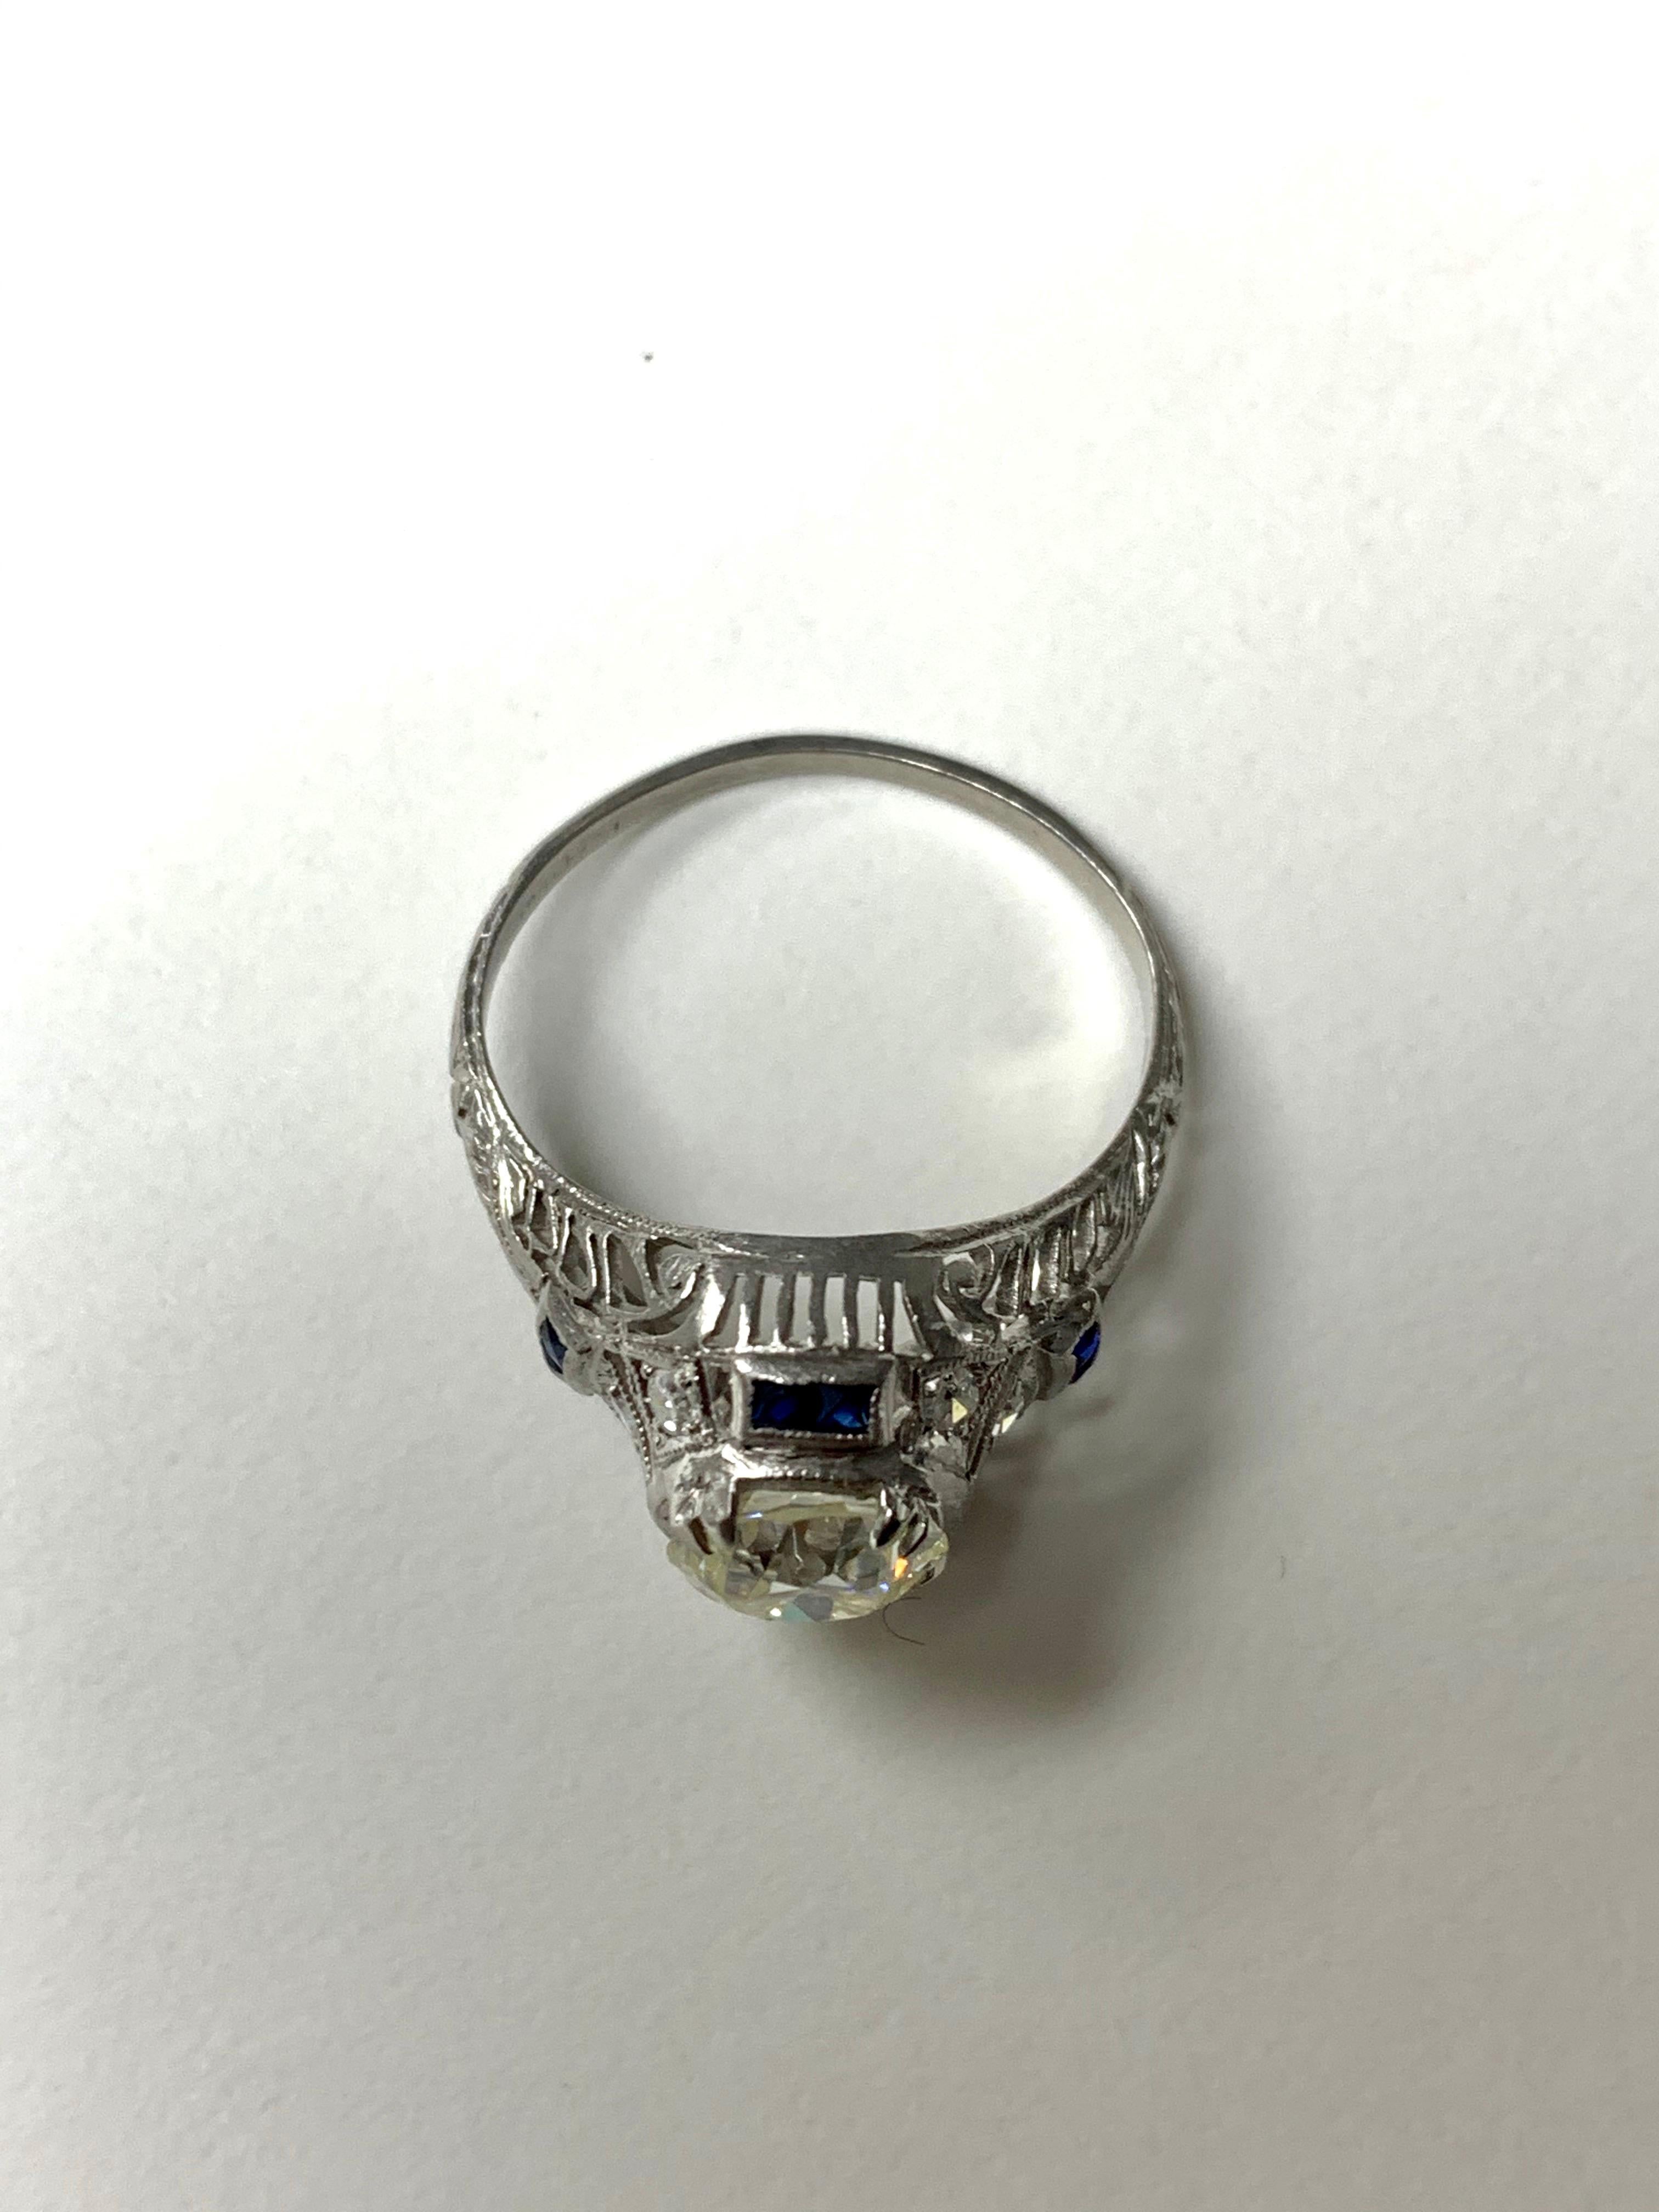 1920s Antique Old European Cut Diamond Ring in Platinum In Excellent Condition For Sale In New York, NY